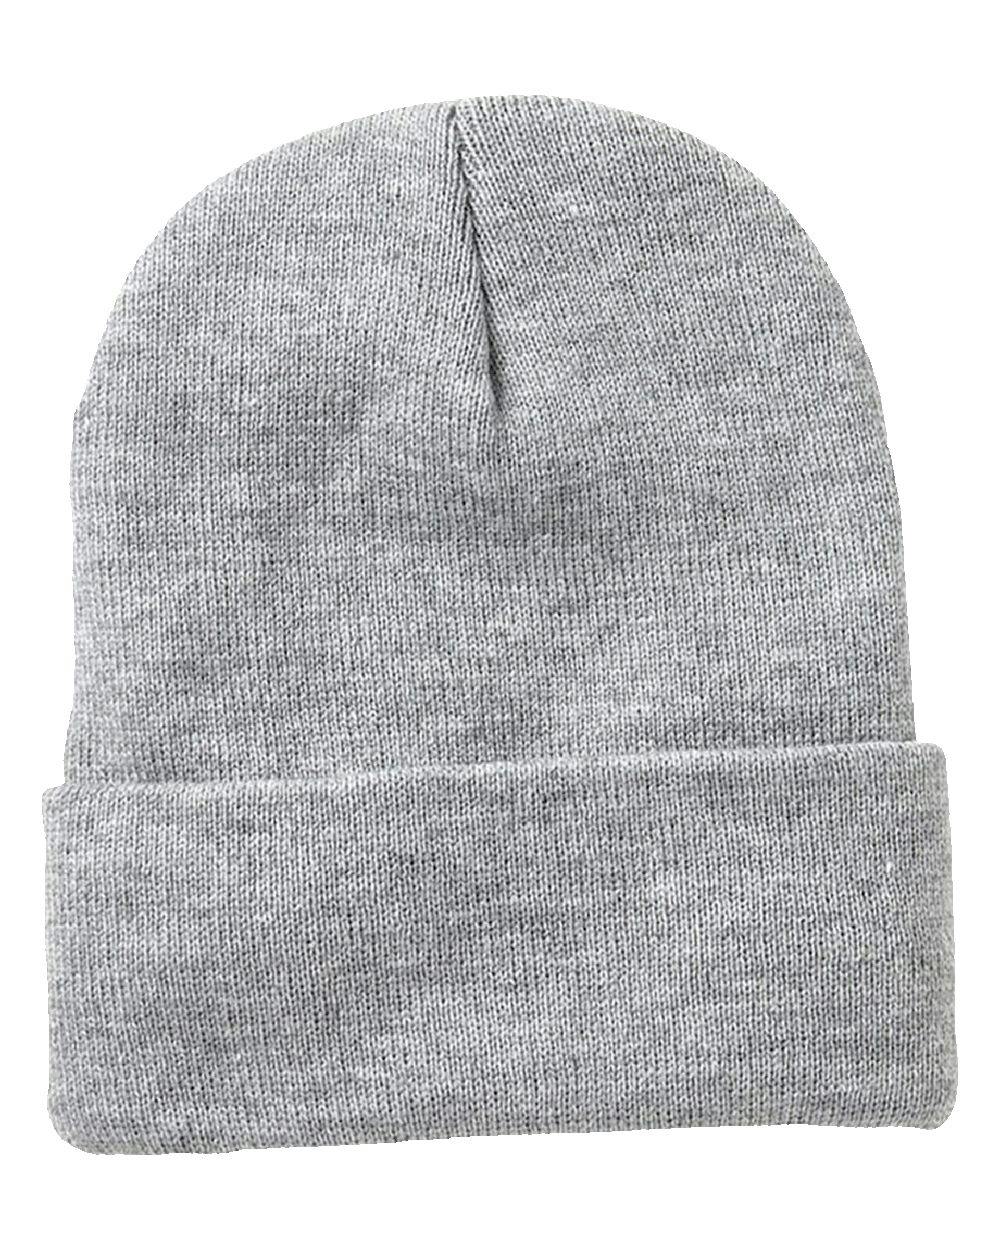 Image for 12" Sherpa Lined Cuffed Beanie - SP12SL